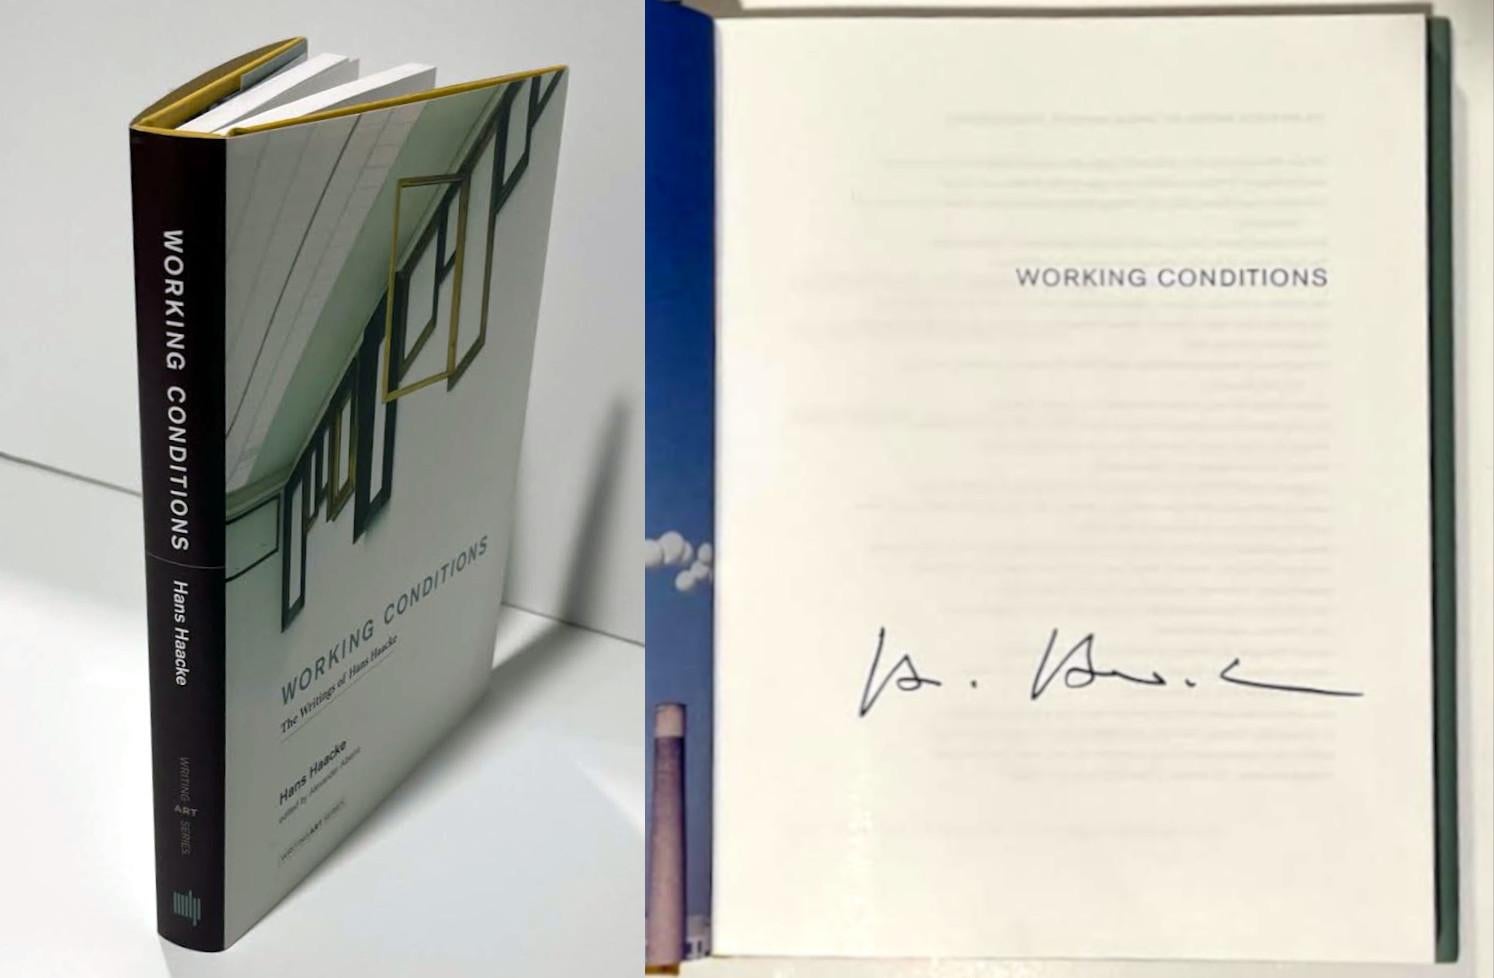 Monograph: Working Conditions (Hand signed by Hans Haacke)